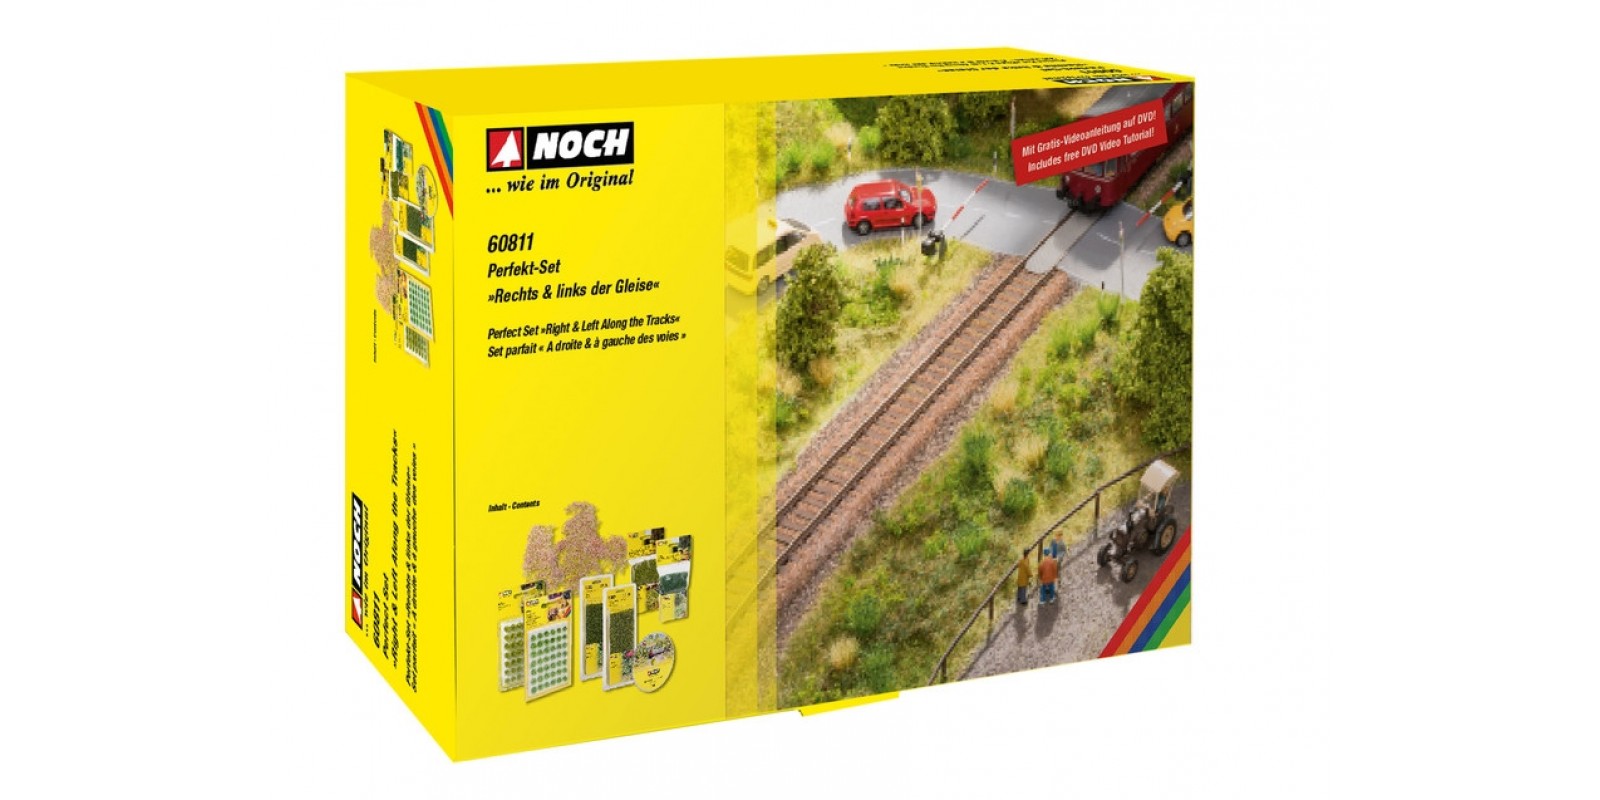 No60811 Perfect Set "Right & Left Along the Tracks”